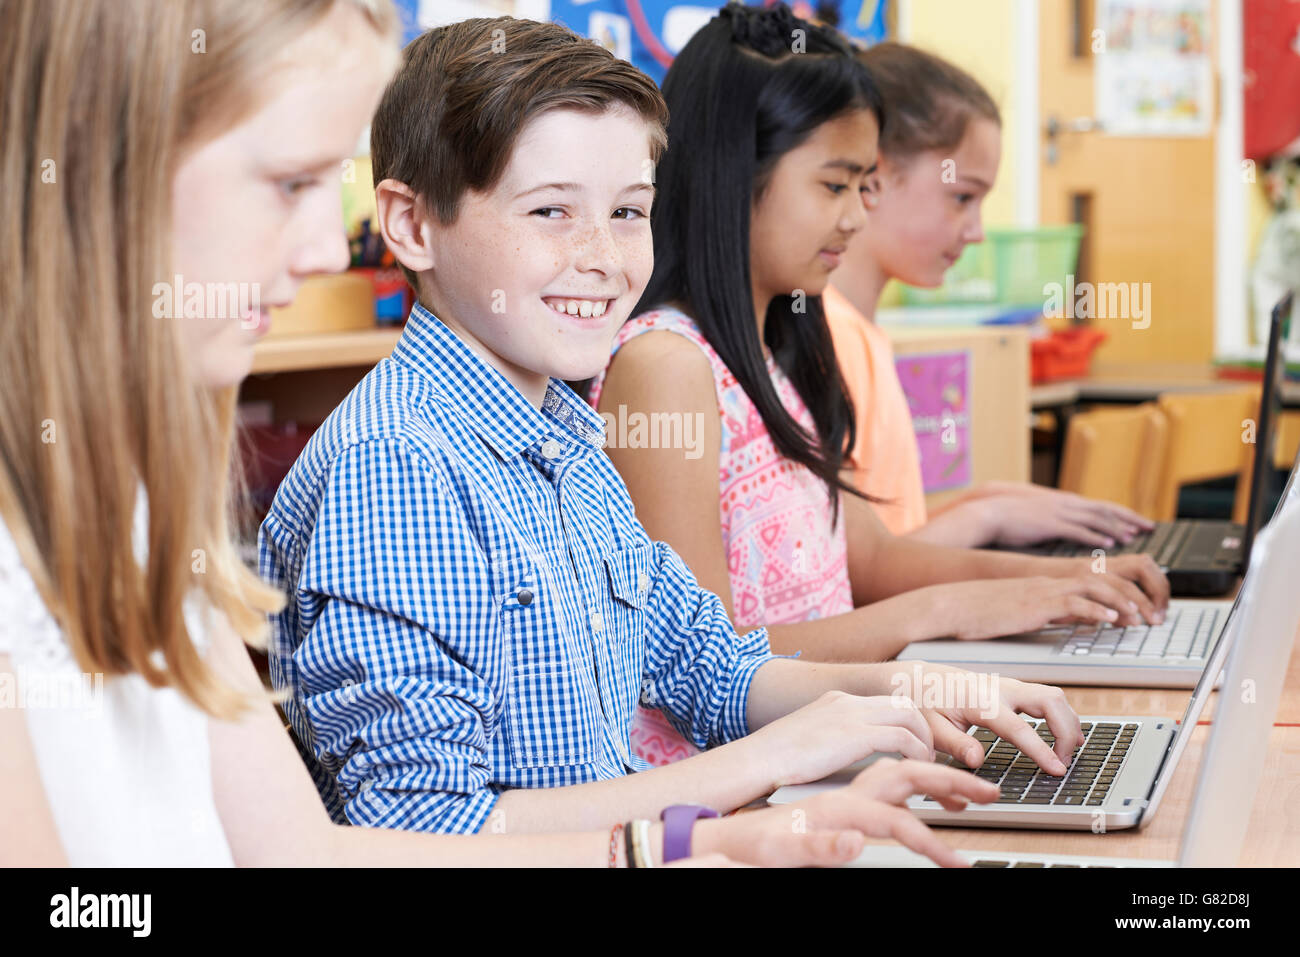 Group Of Elementary School Children In Computer Class Stock Photo